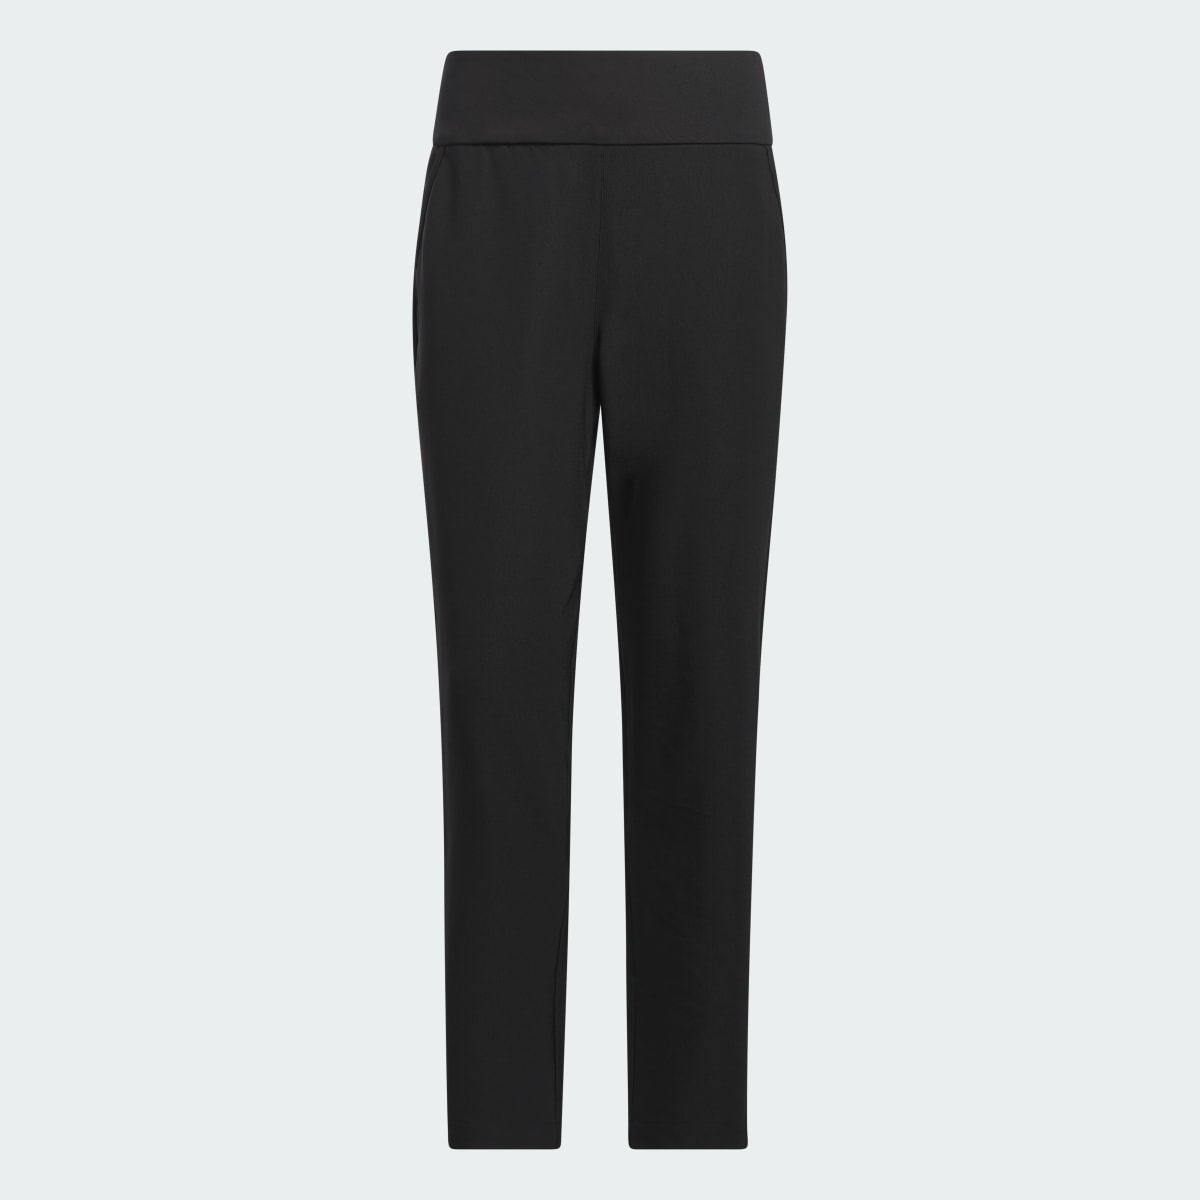 Adidas Ultimate365 Solid Ankle Trousers. 4